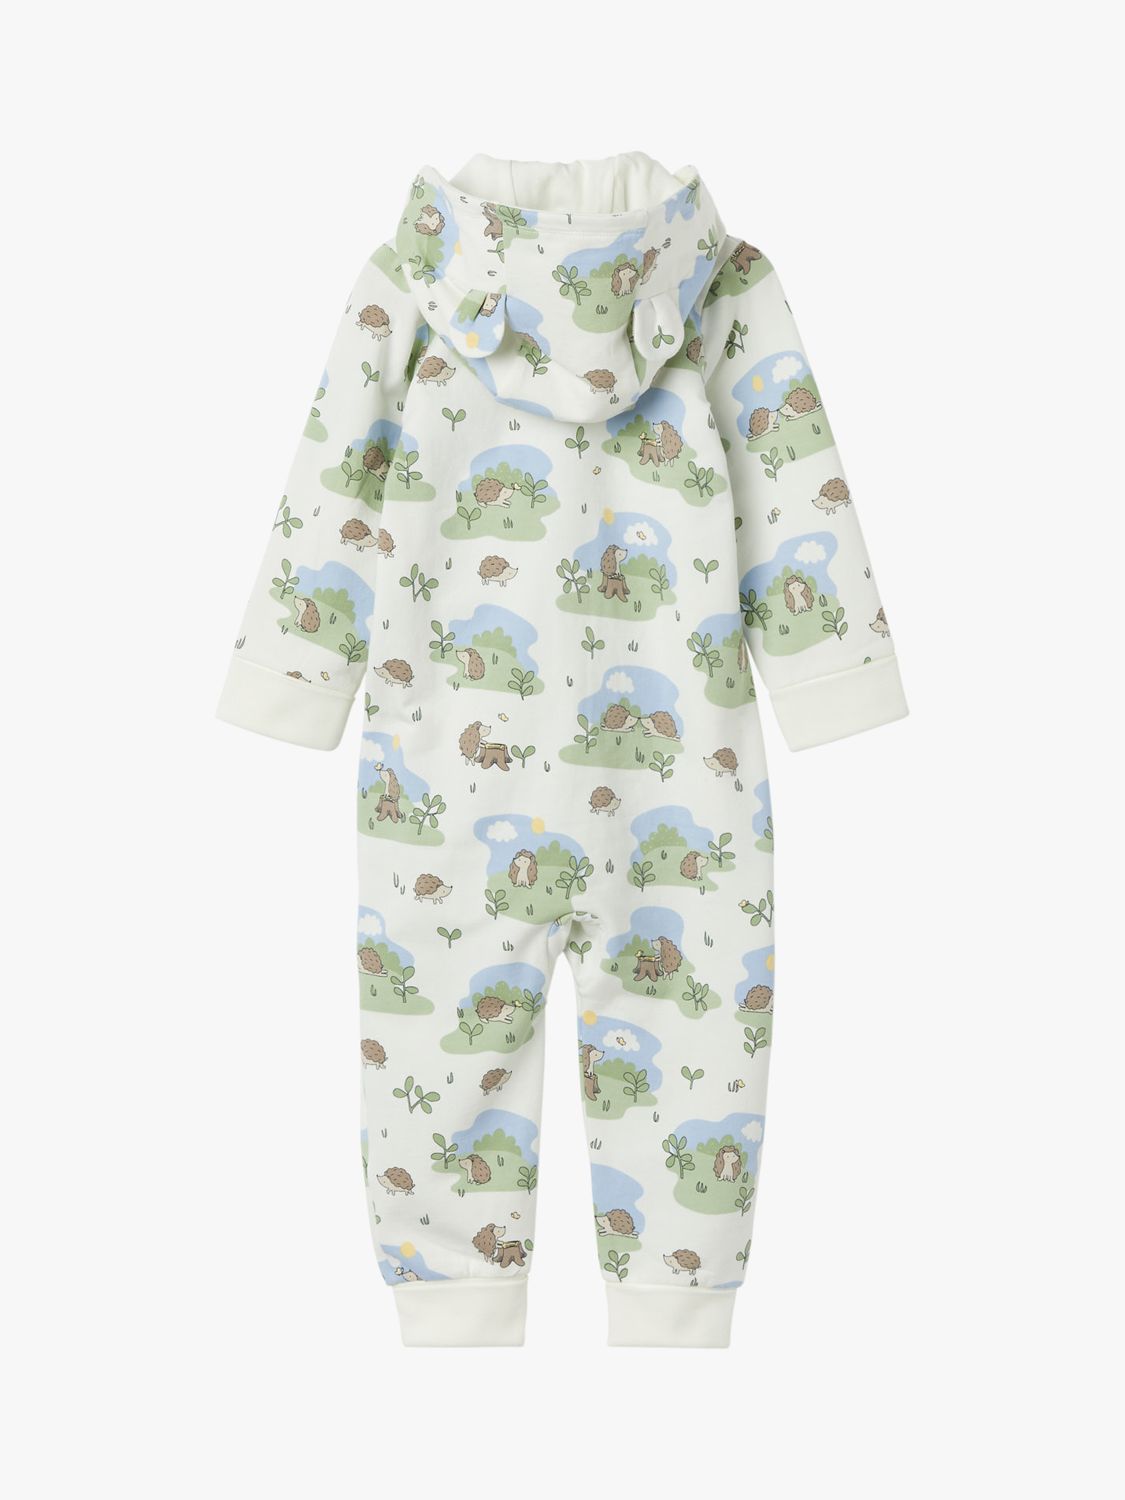 Polarn O. Pyret Baby Organic Cotton Blend Hedgehog Print Hooded All In One Suit, White, 1-2 months